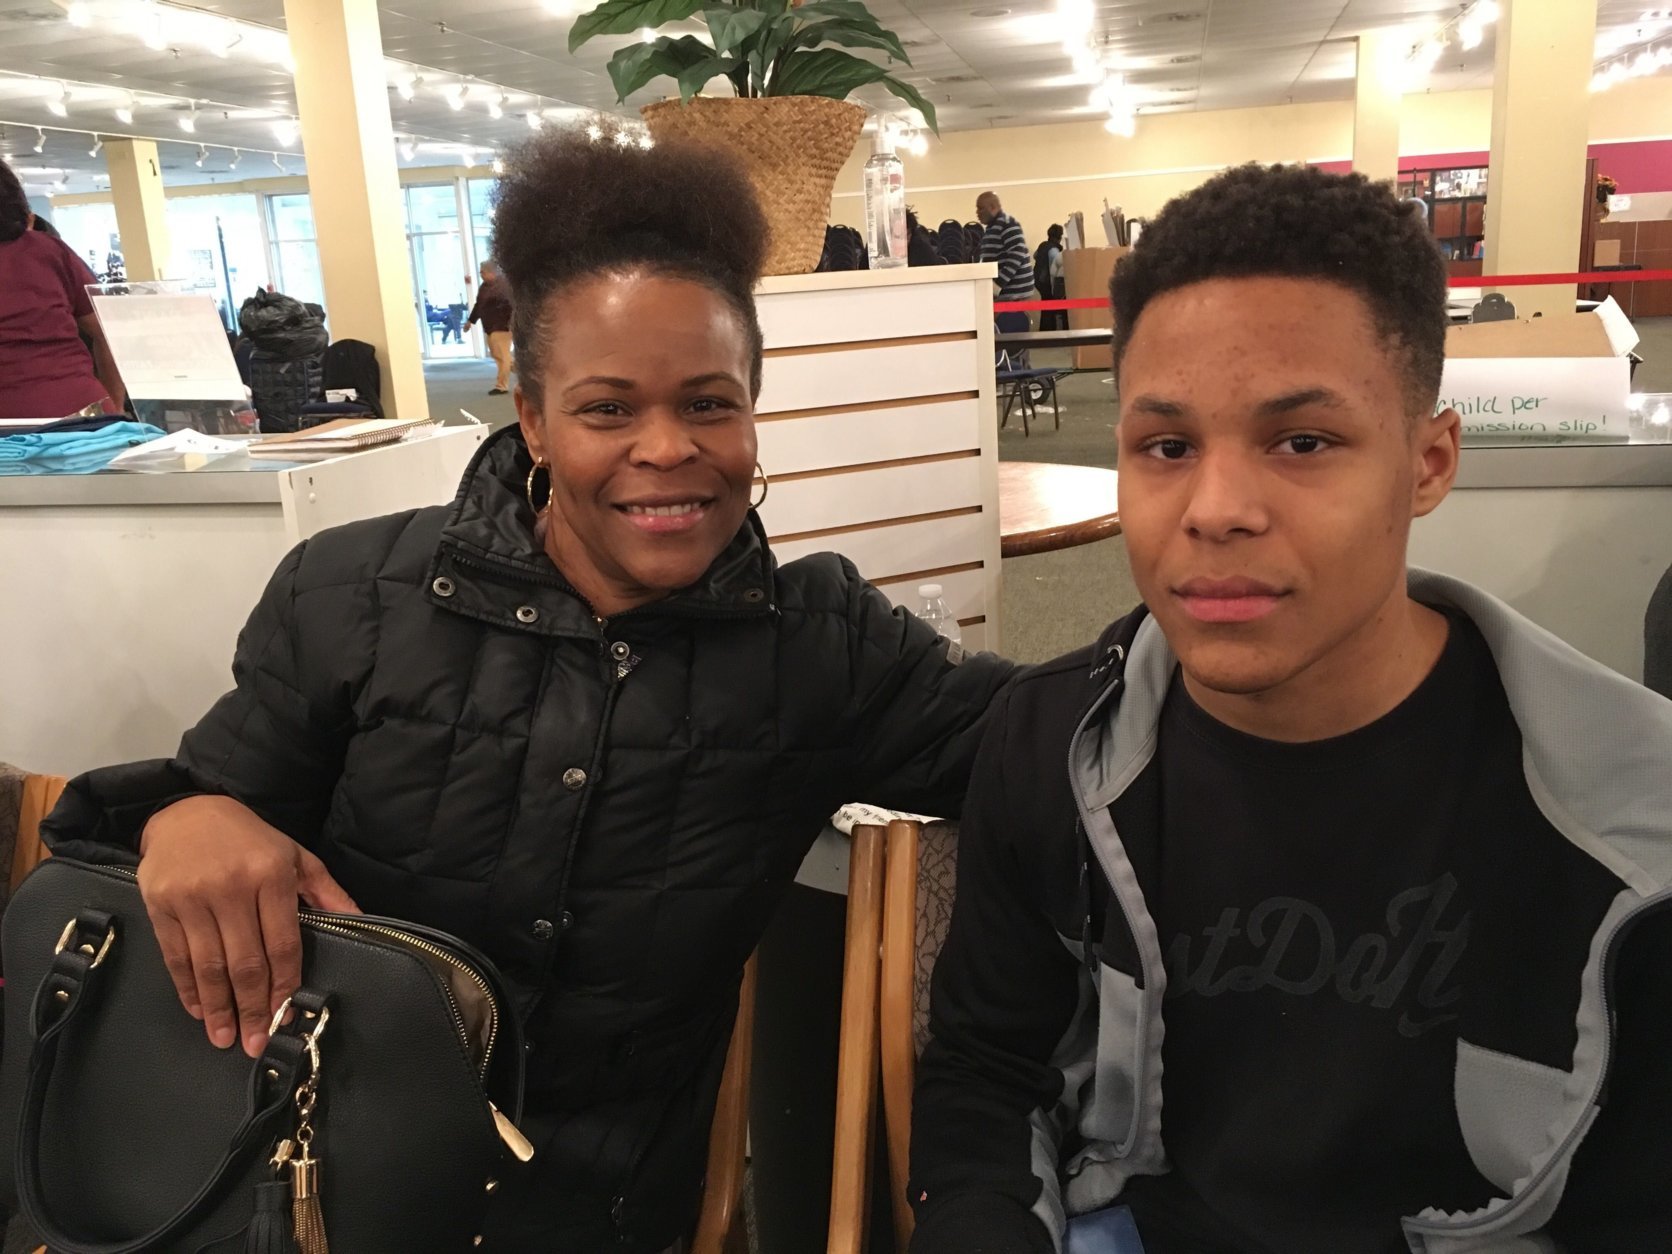 Joshua Lewis (left) of Upper Marlboro heard about this event through his mom (right). He hopes to make money and gain more work experience from a summer job. (WTOP/Liz Anderson) 